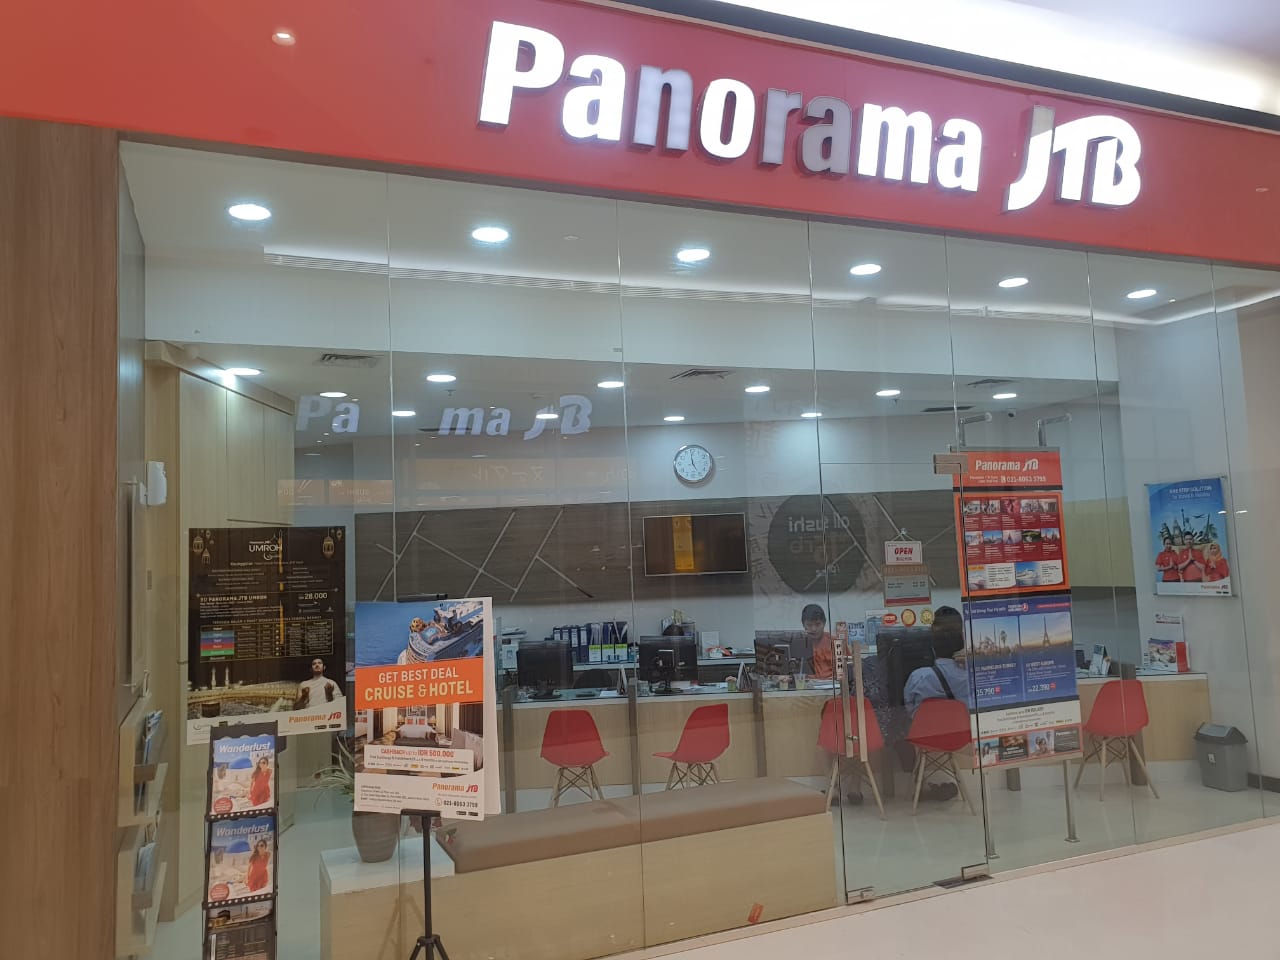 Panorama JTB shop front in lippo mall puri st. moritz